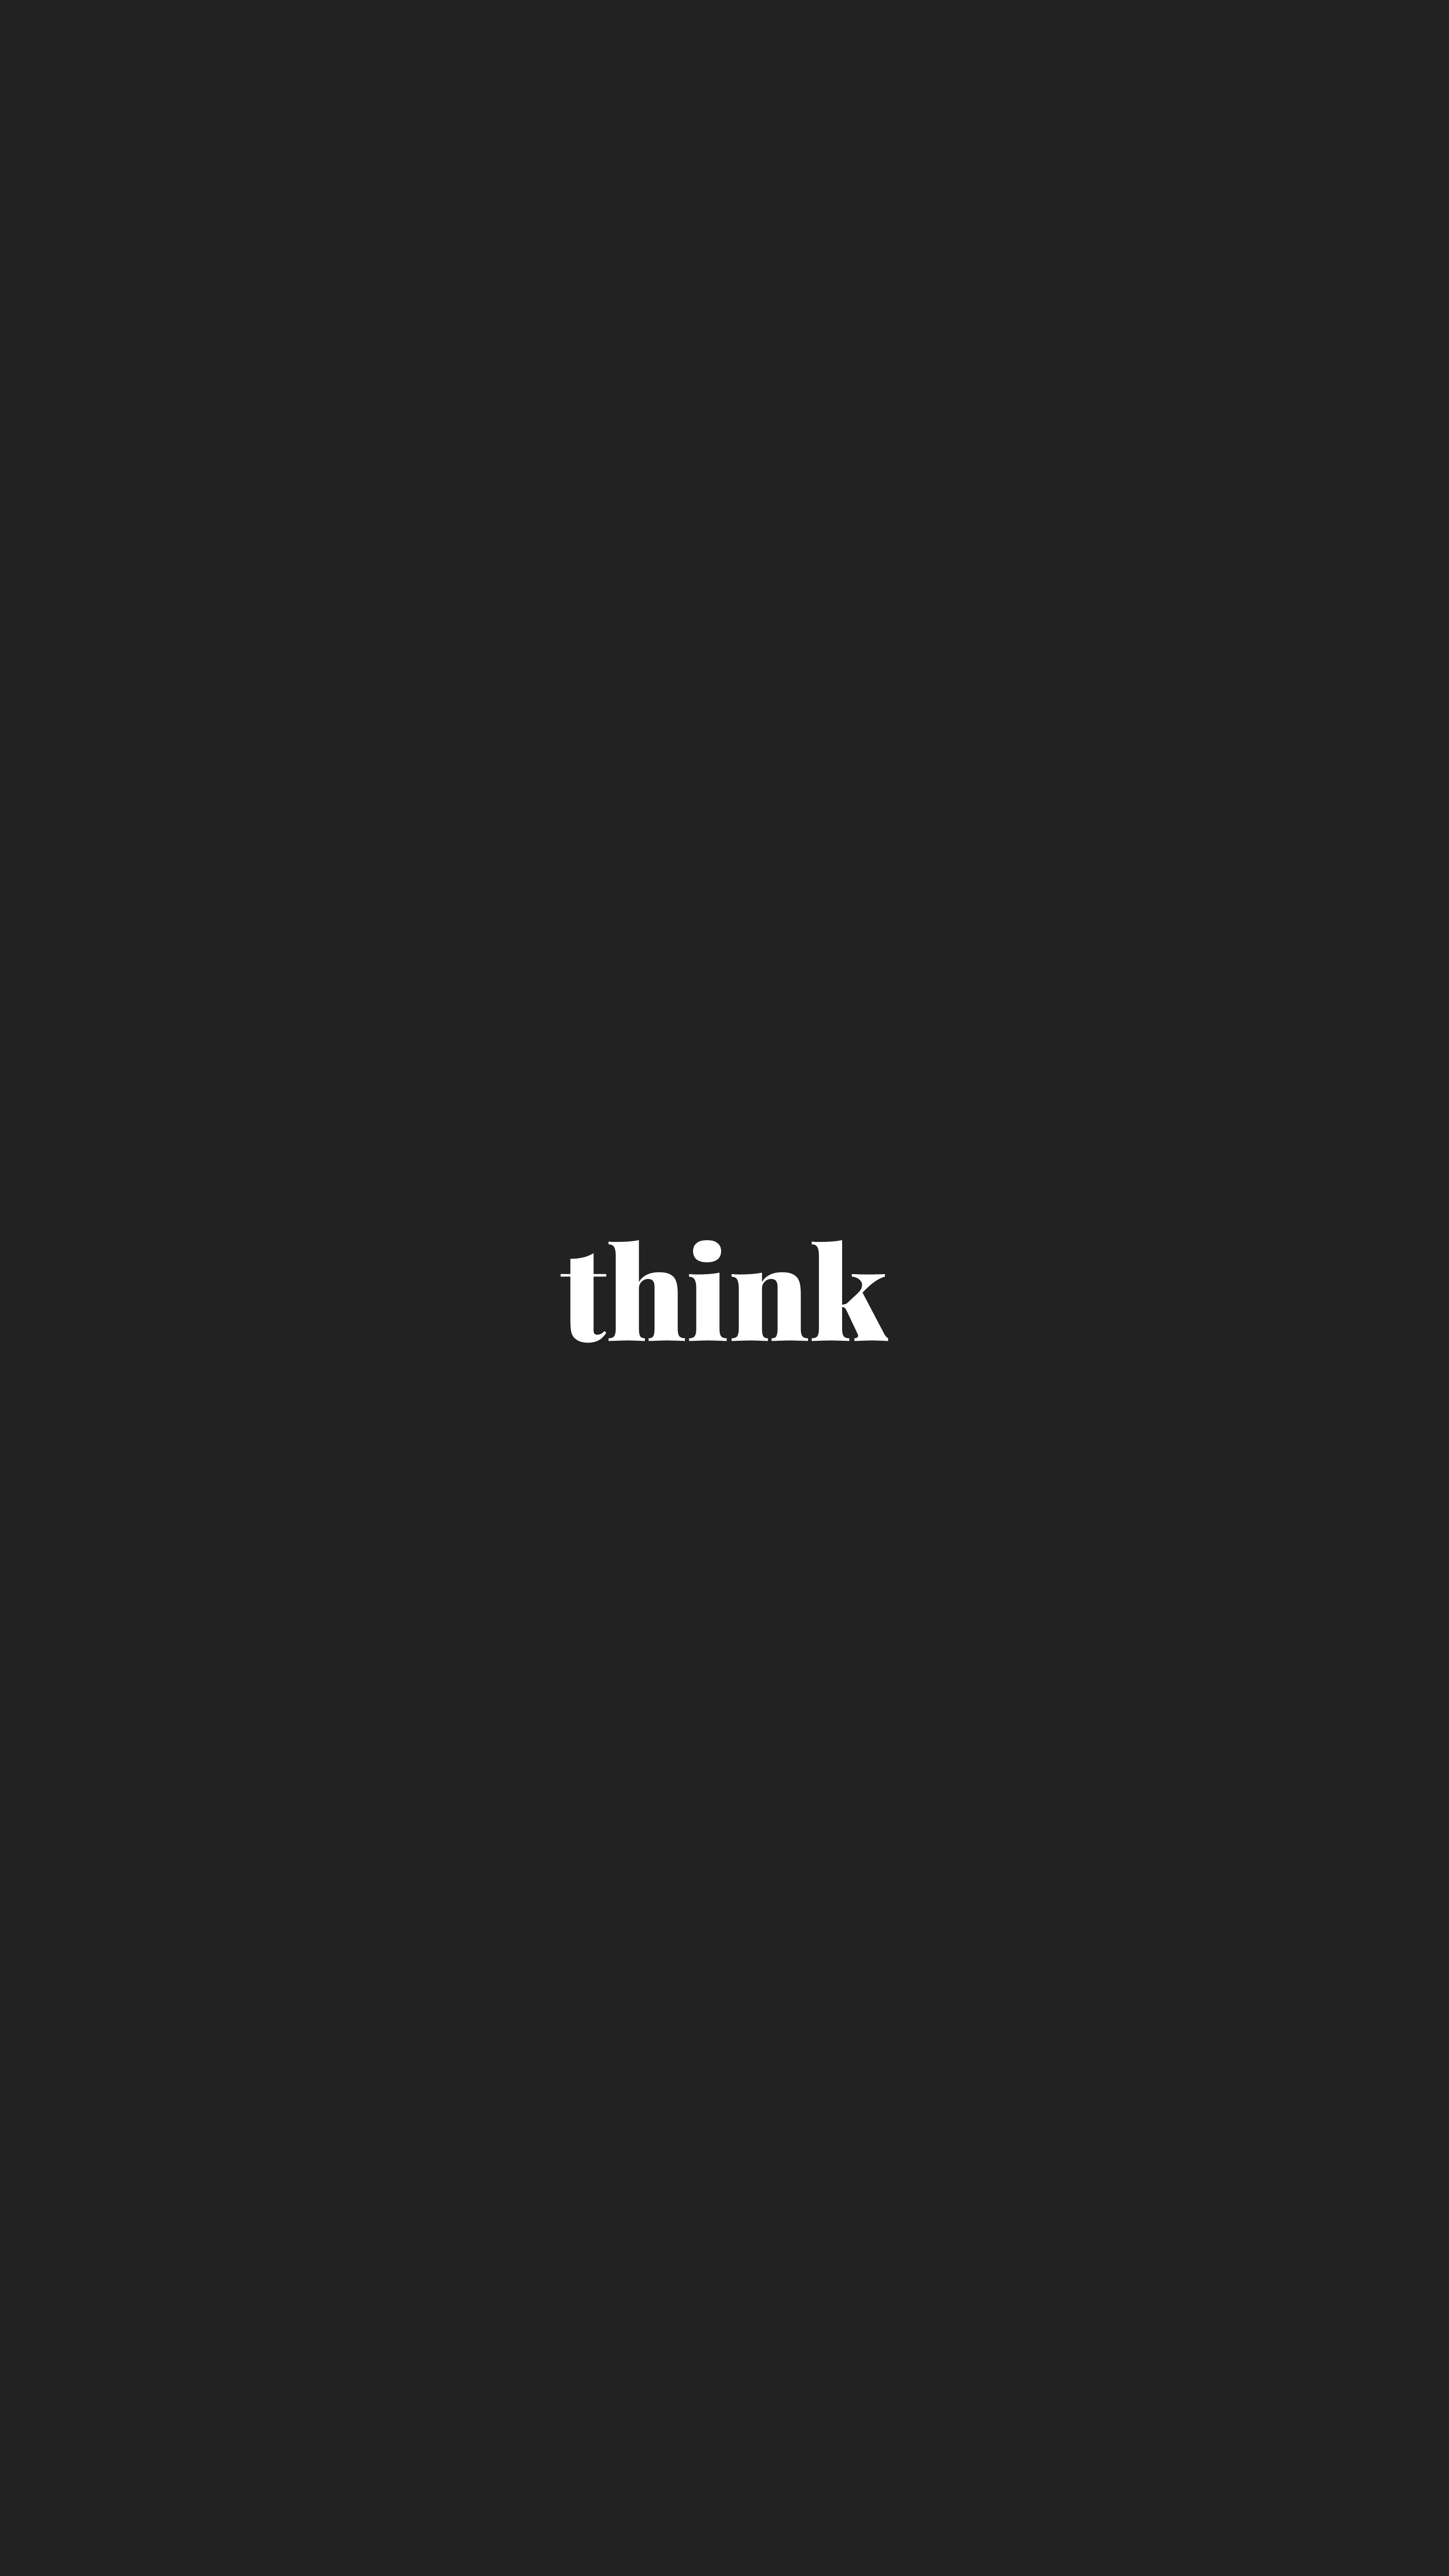 text, words, minimalism, word, think High Definition image